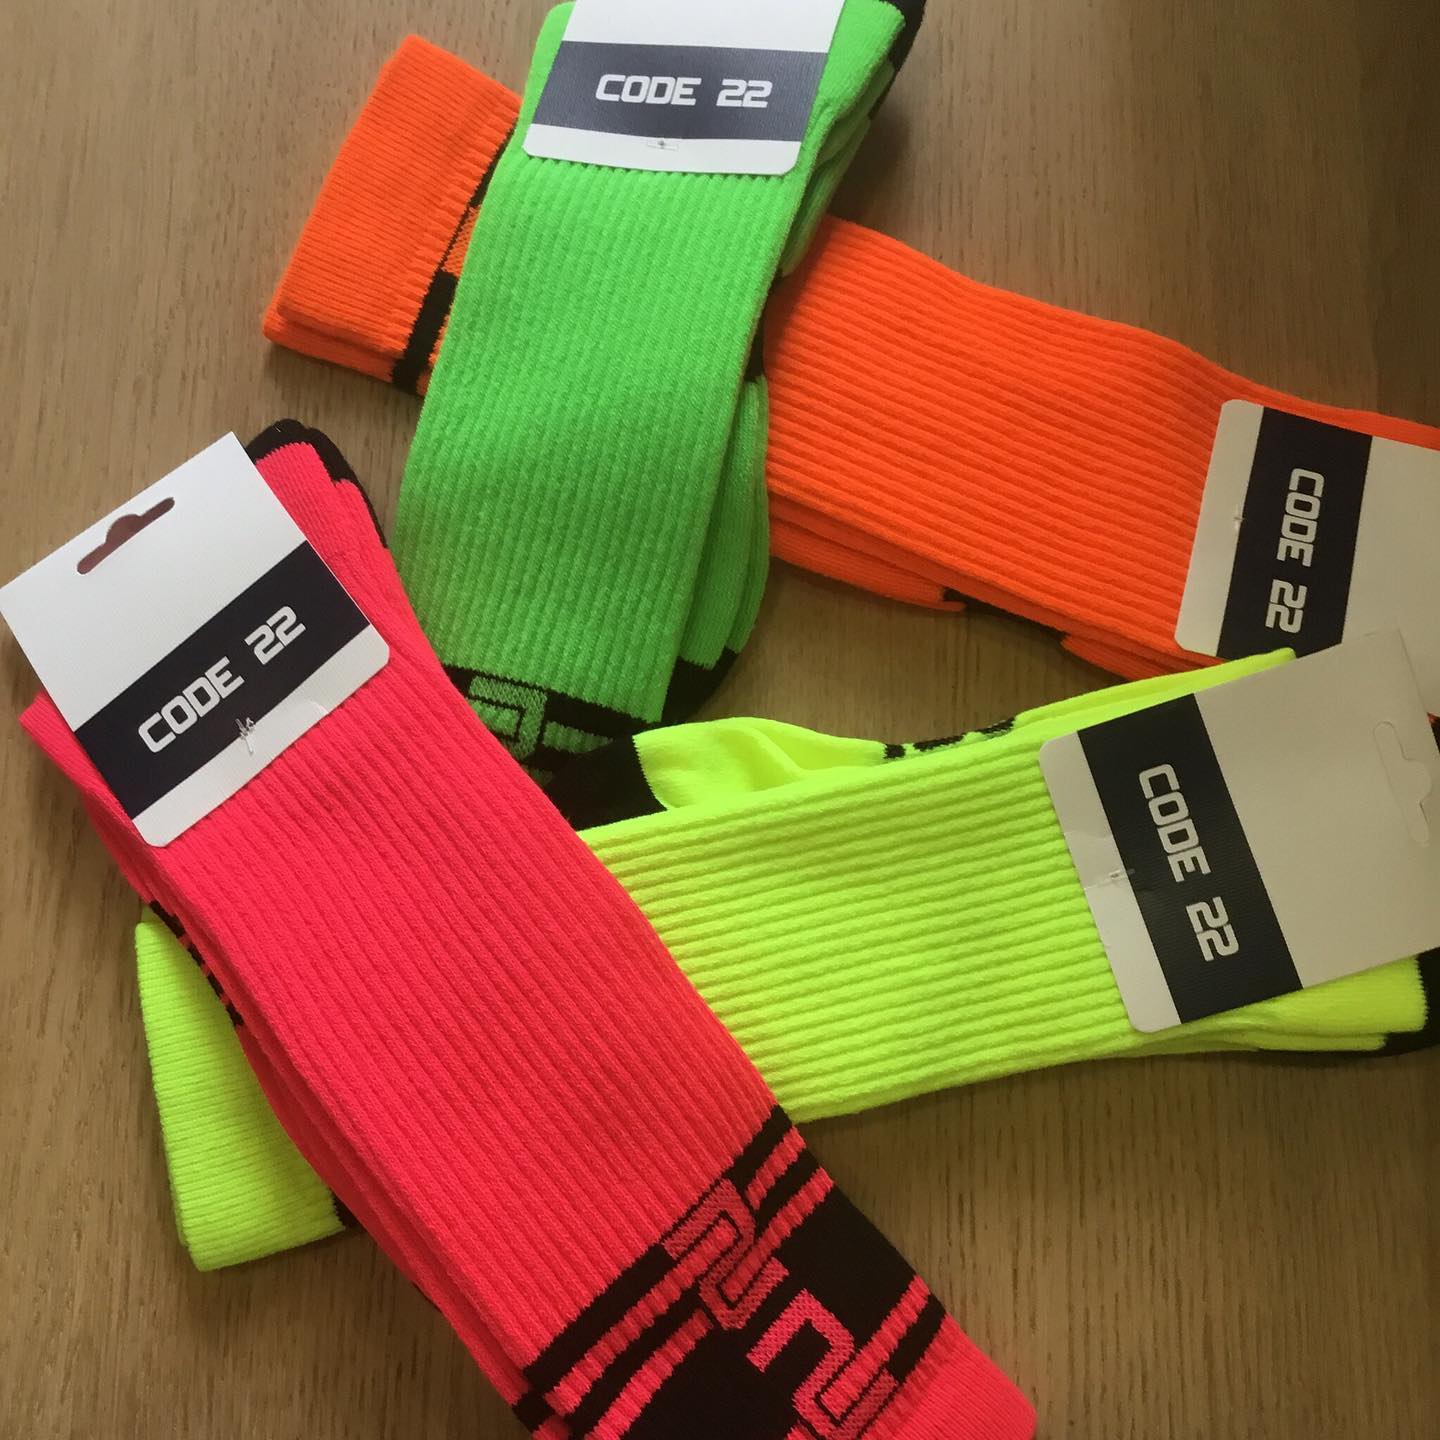 The bright and vibrant Active Neon socks by CODE 22 are back! Made from Drytex, a fabric that allows your skin to breathe better in four amazing colours! Check out all socks available:
____
menandunderwear.com/shop